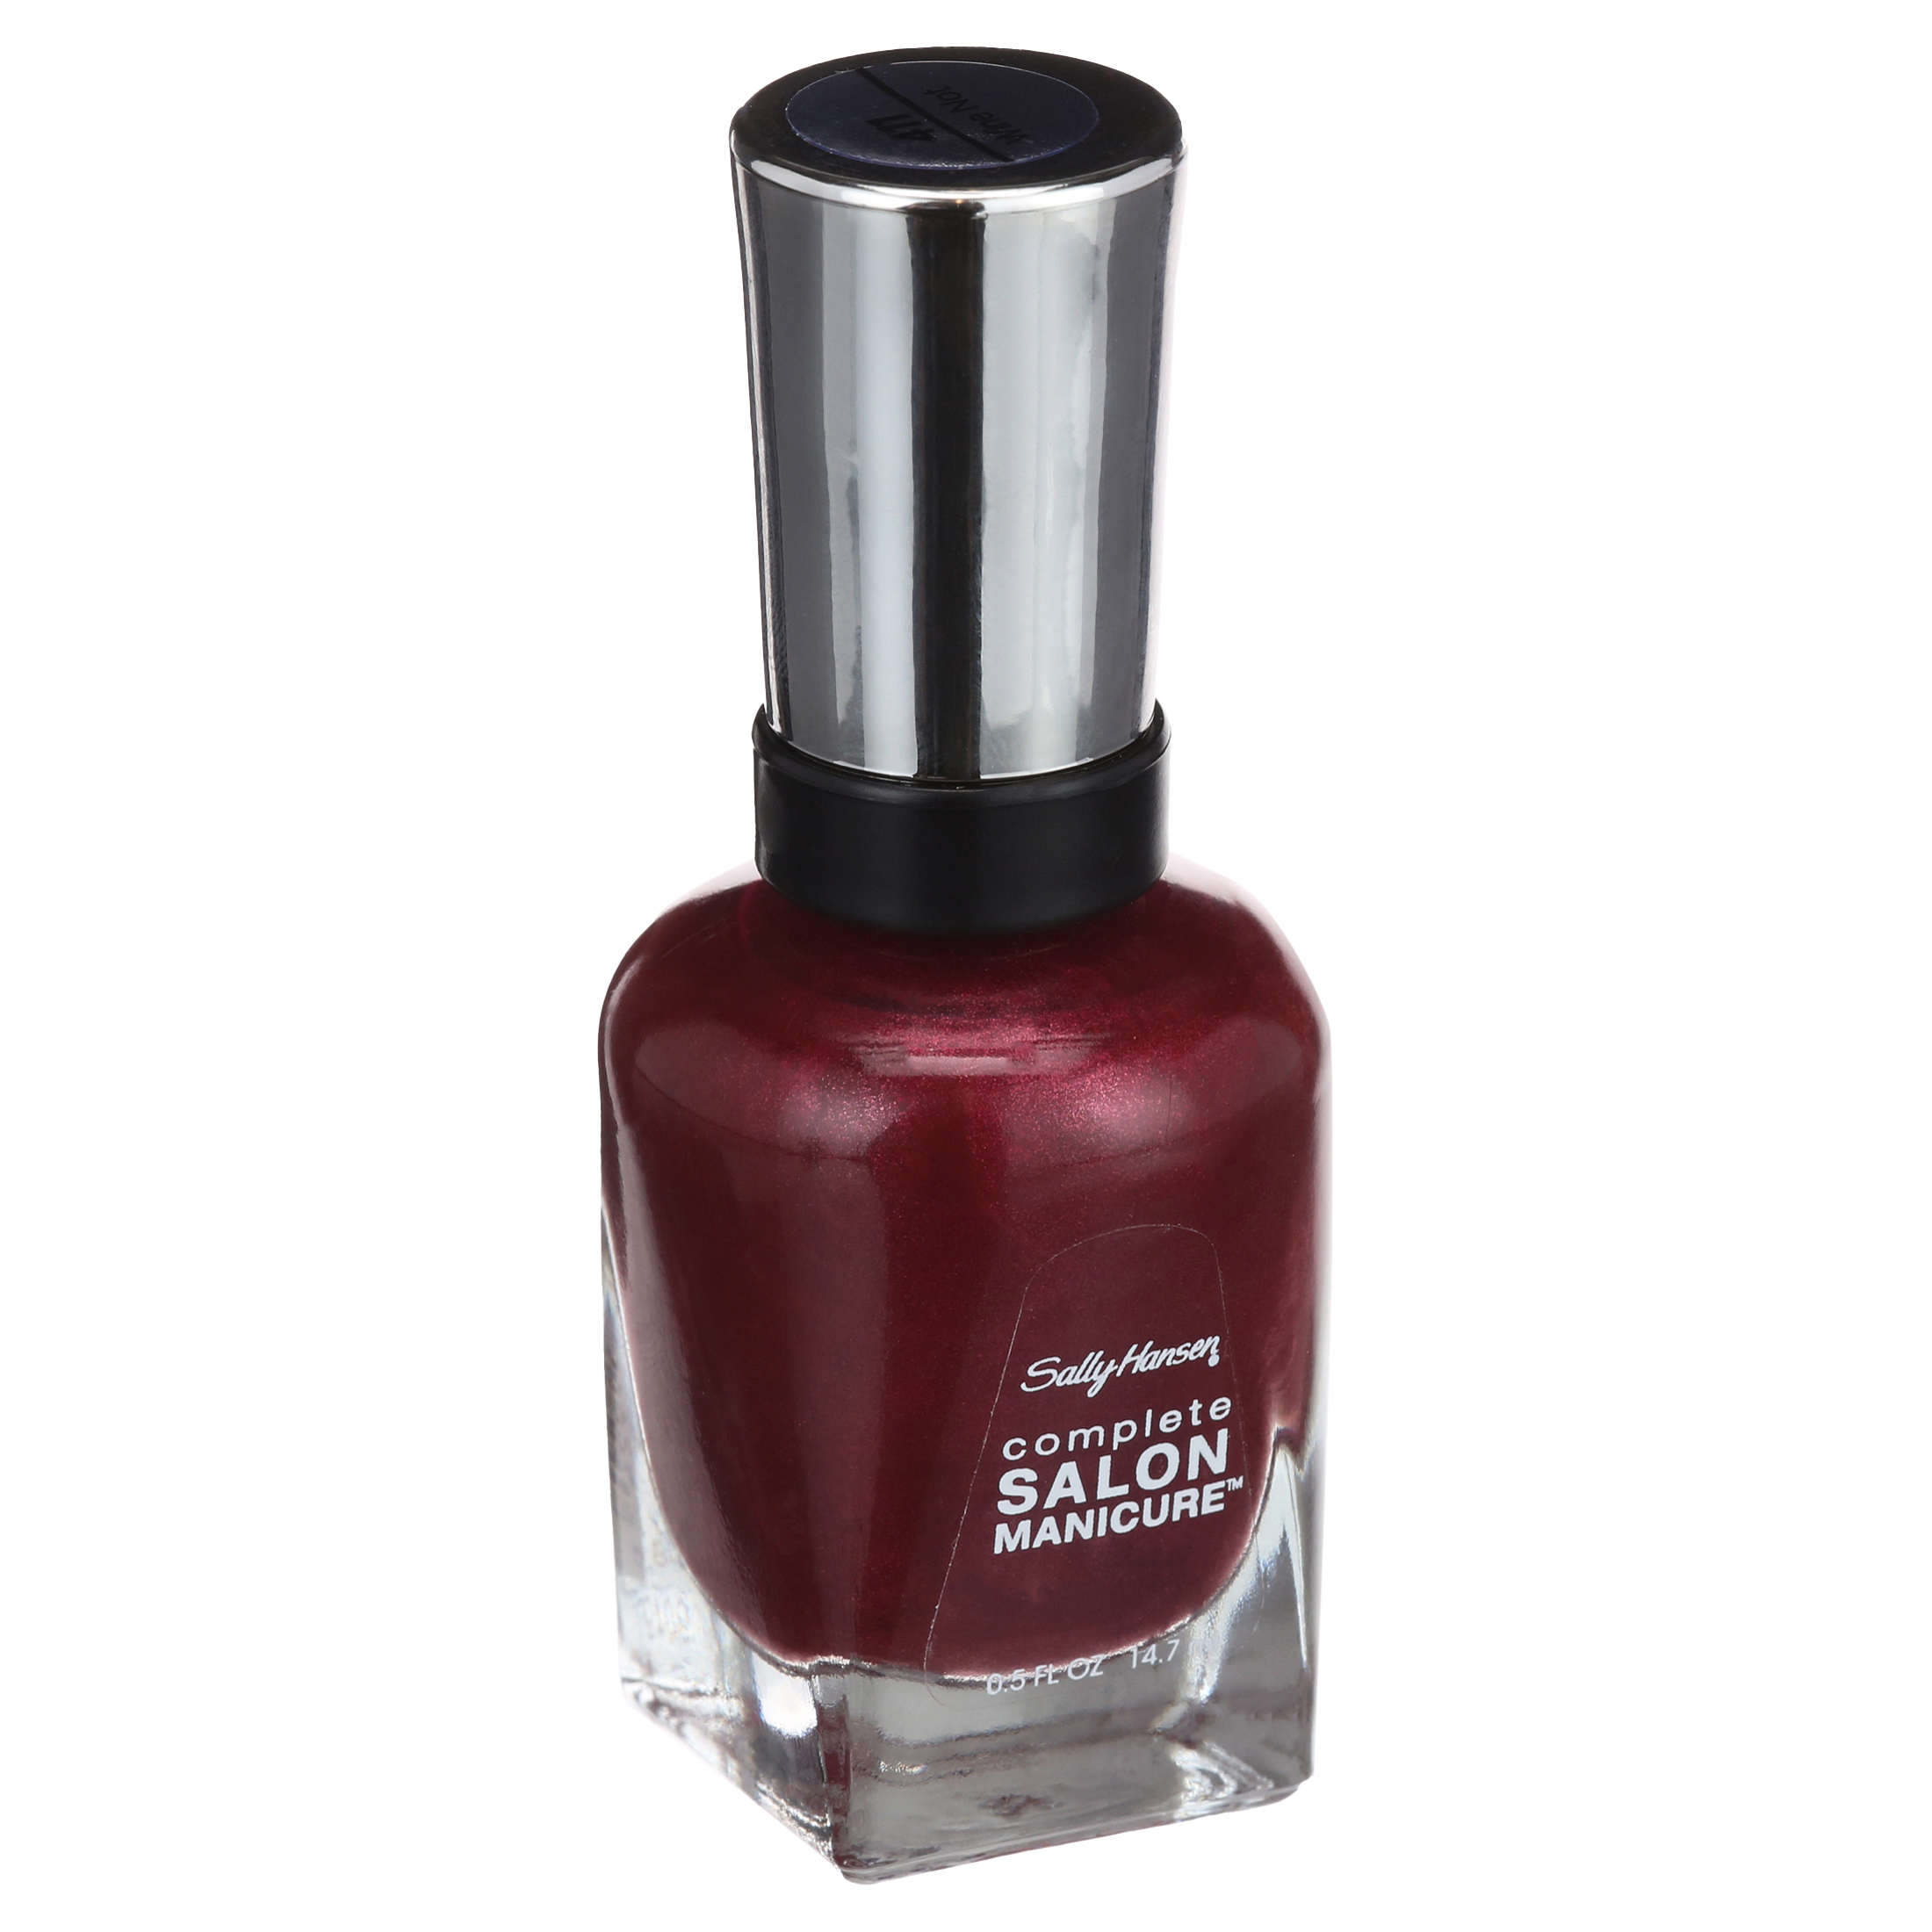 Sally Hansen Complete Salon Manicure Nail Color, Wine Not - image 8 of 8